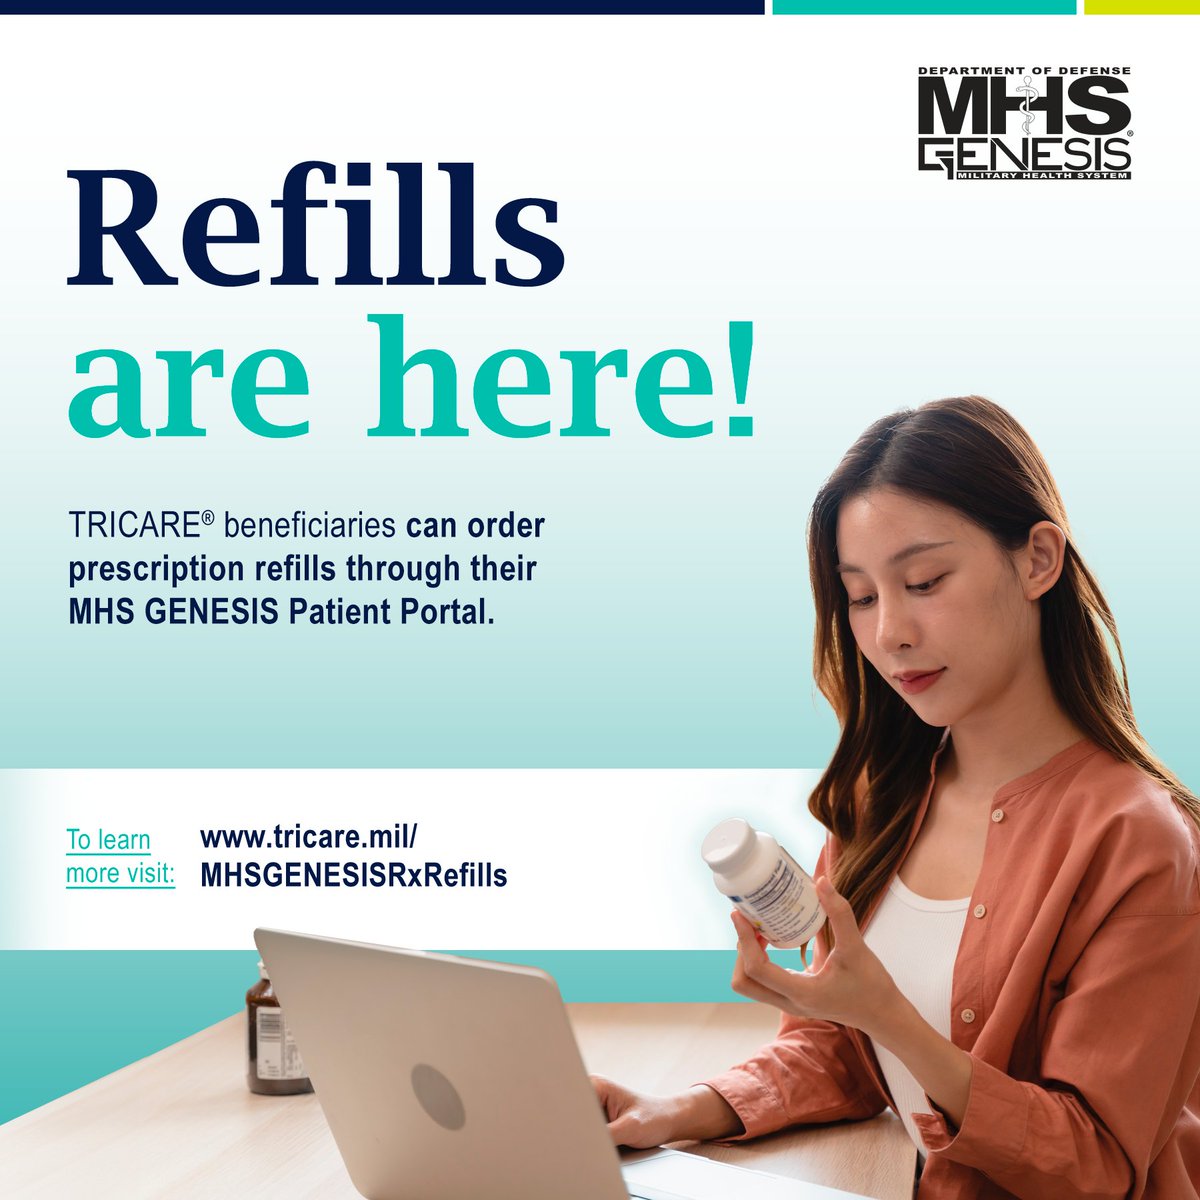 Refilling your prescriptions is easier than ever! You can now use the MHS GENESIS Patient Portal to refill prescriptions at your military pharmacy. Learn more about this new feature at: tricare.mil/MHSGENESISRxRe…